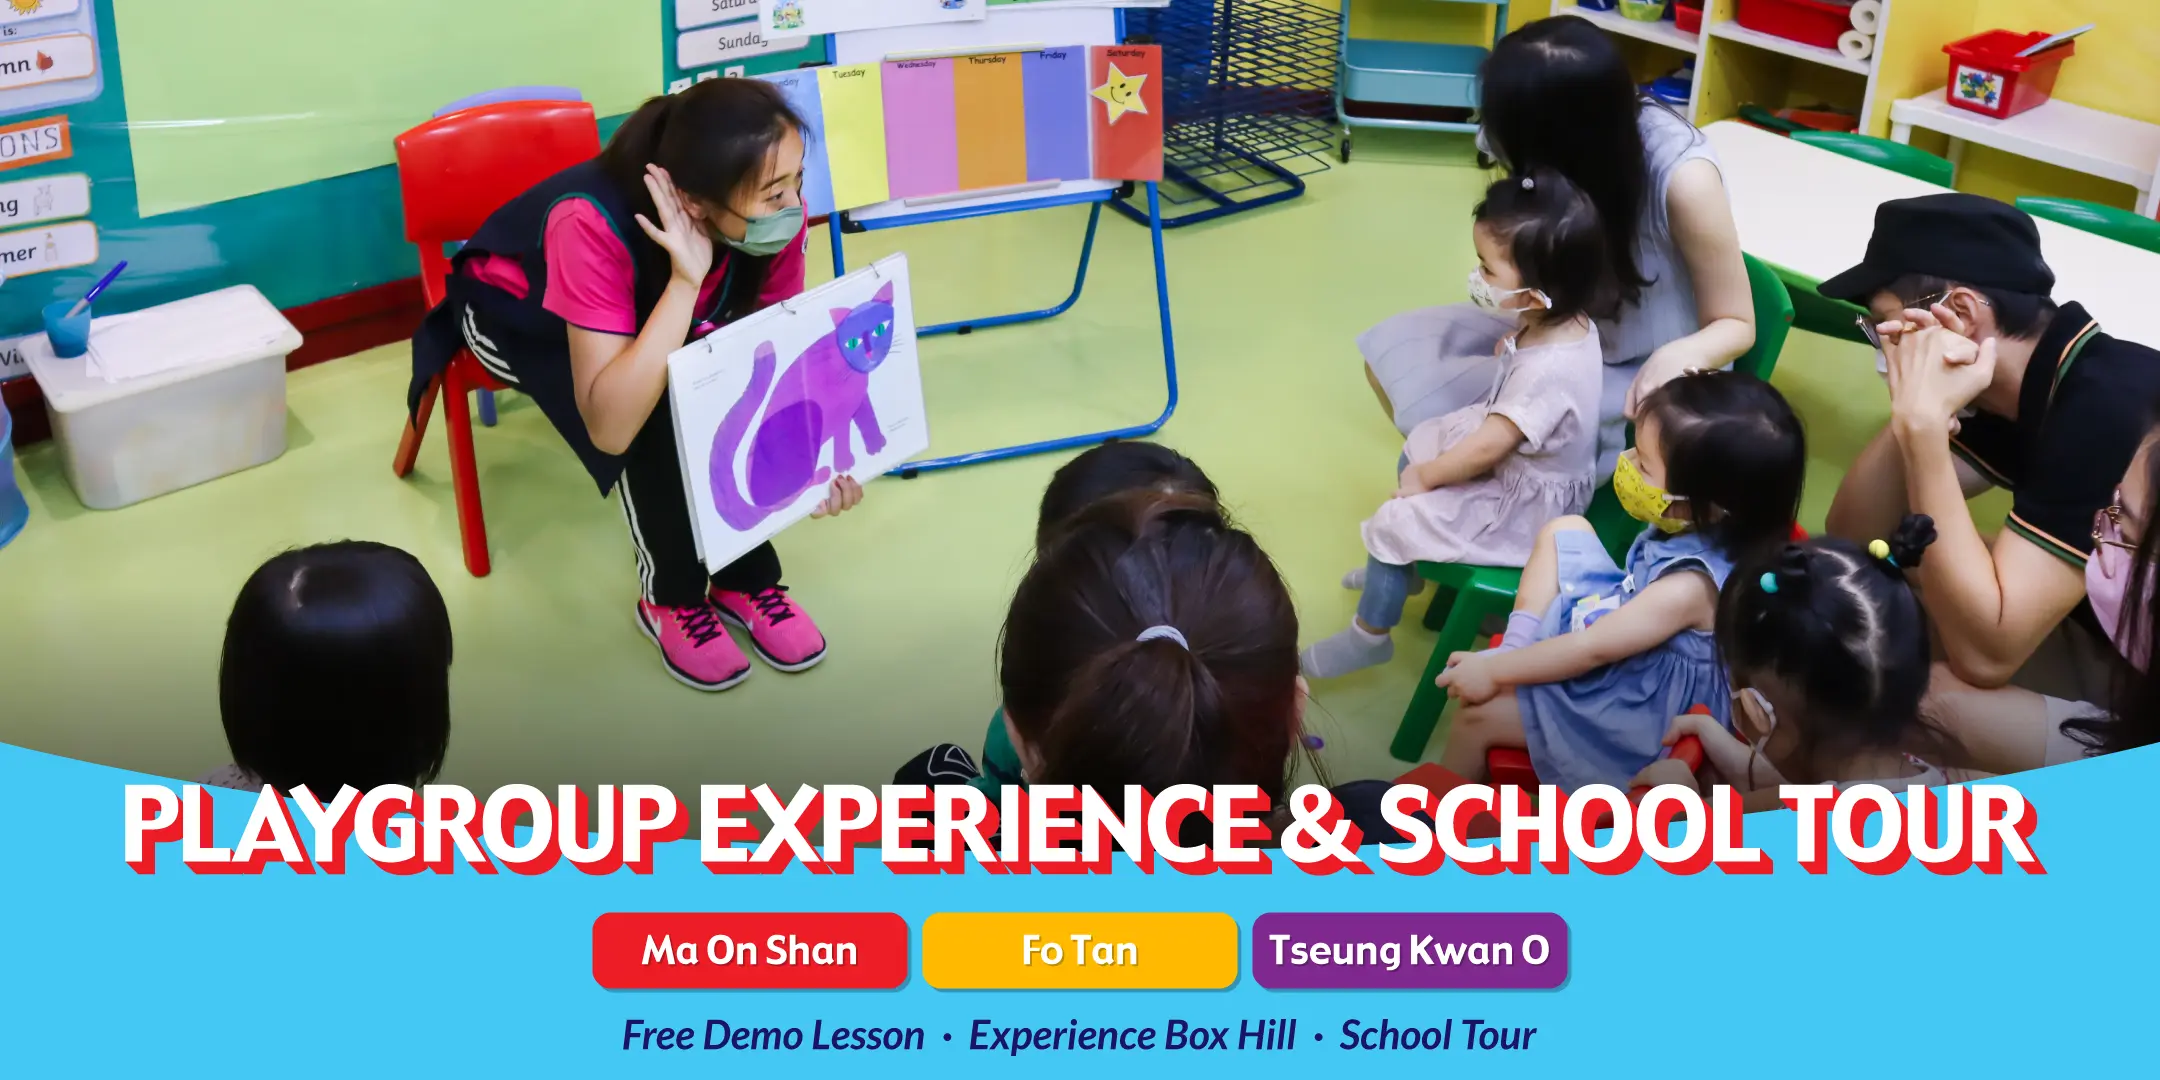 Playgroup Experience & School Tour